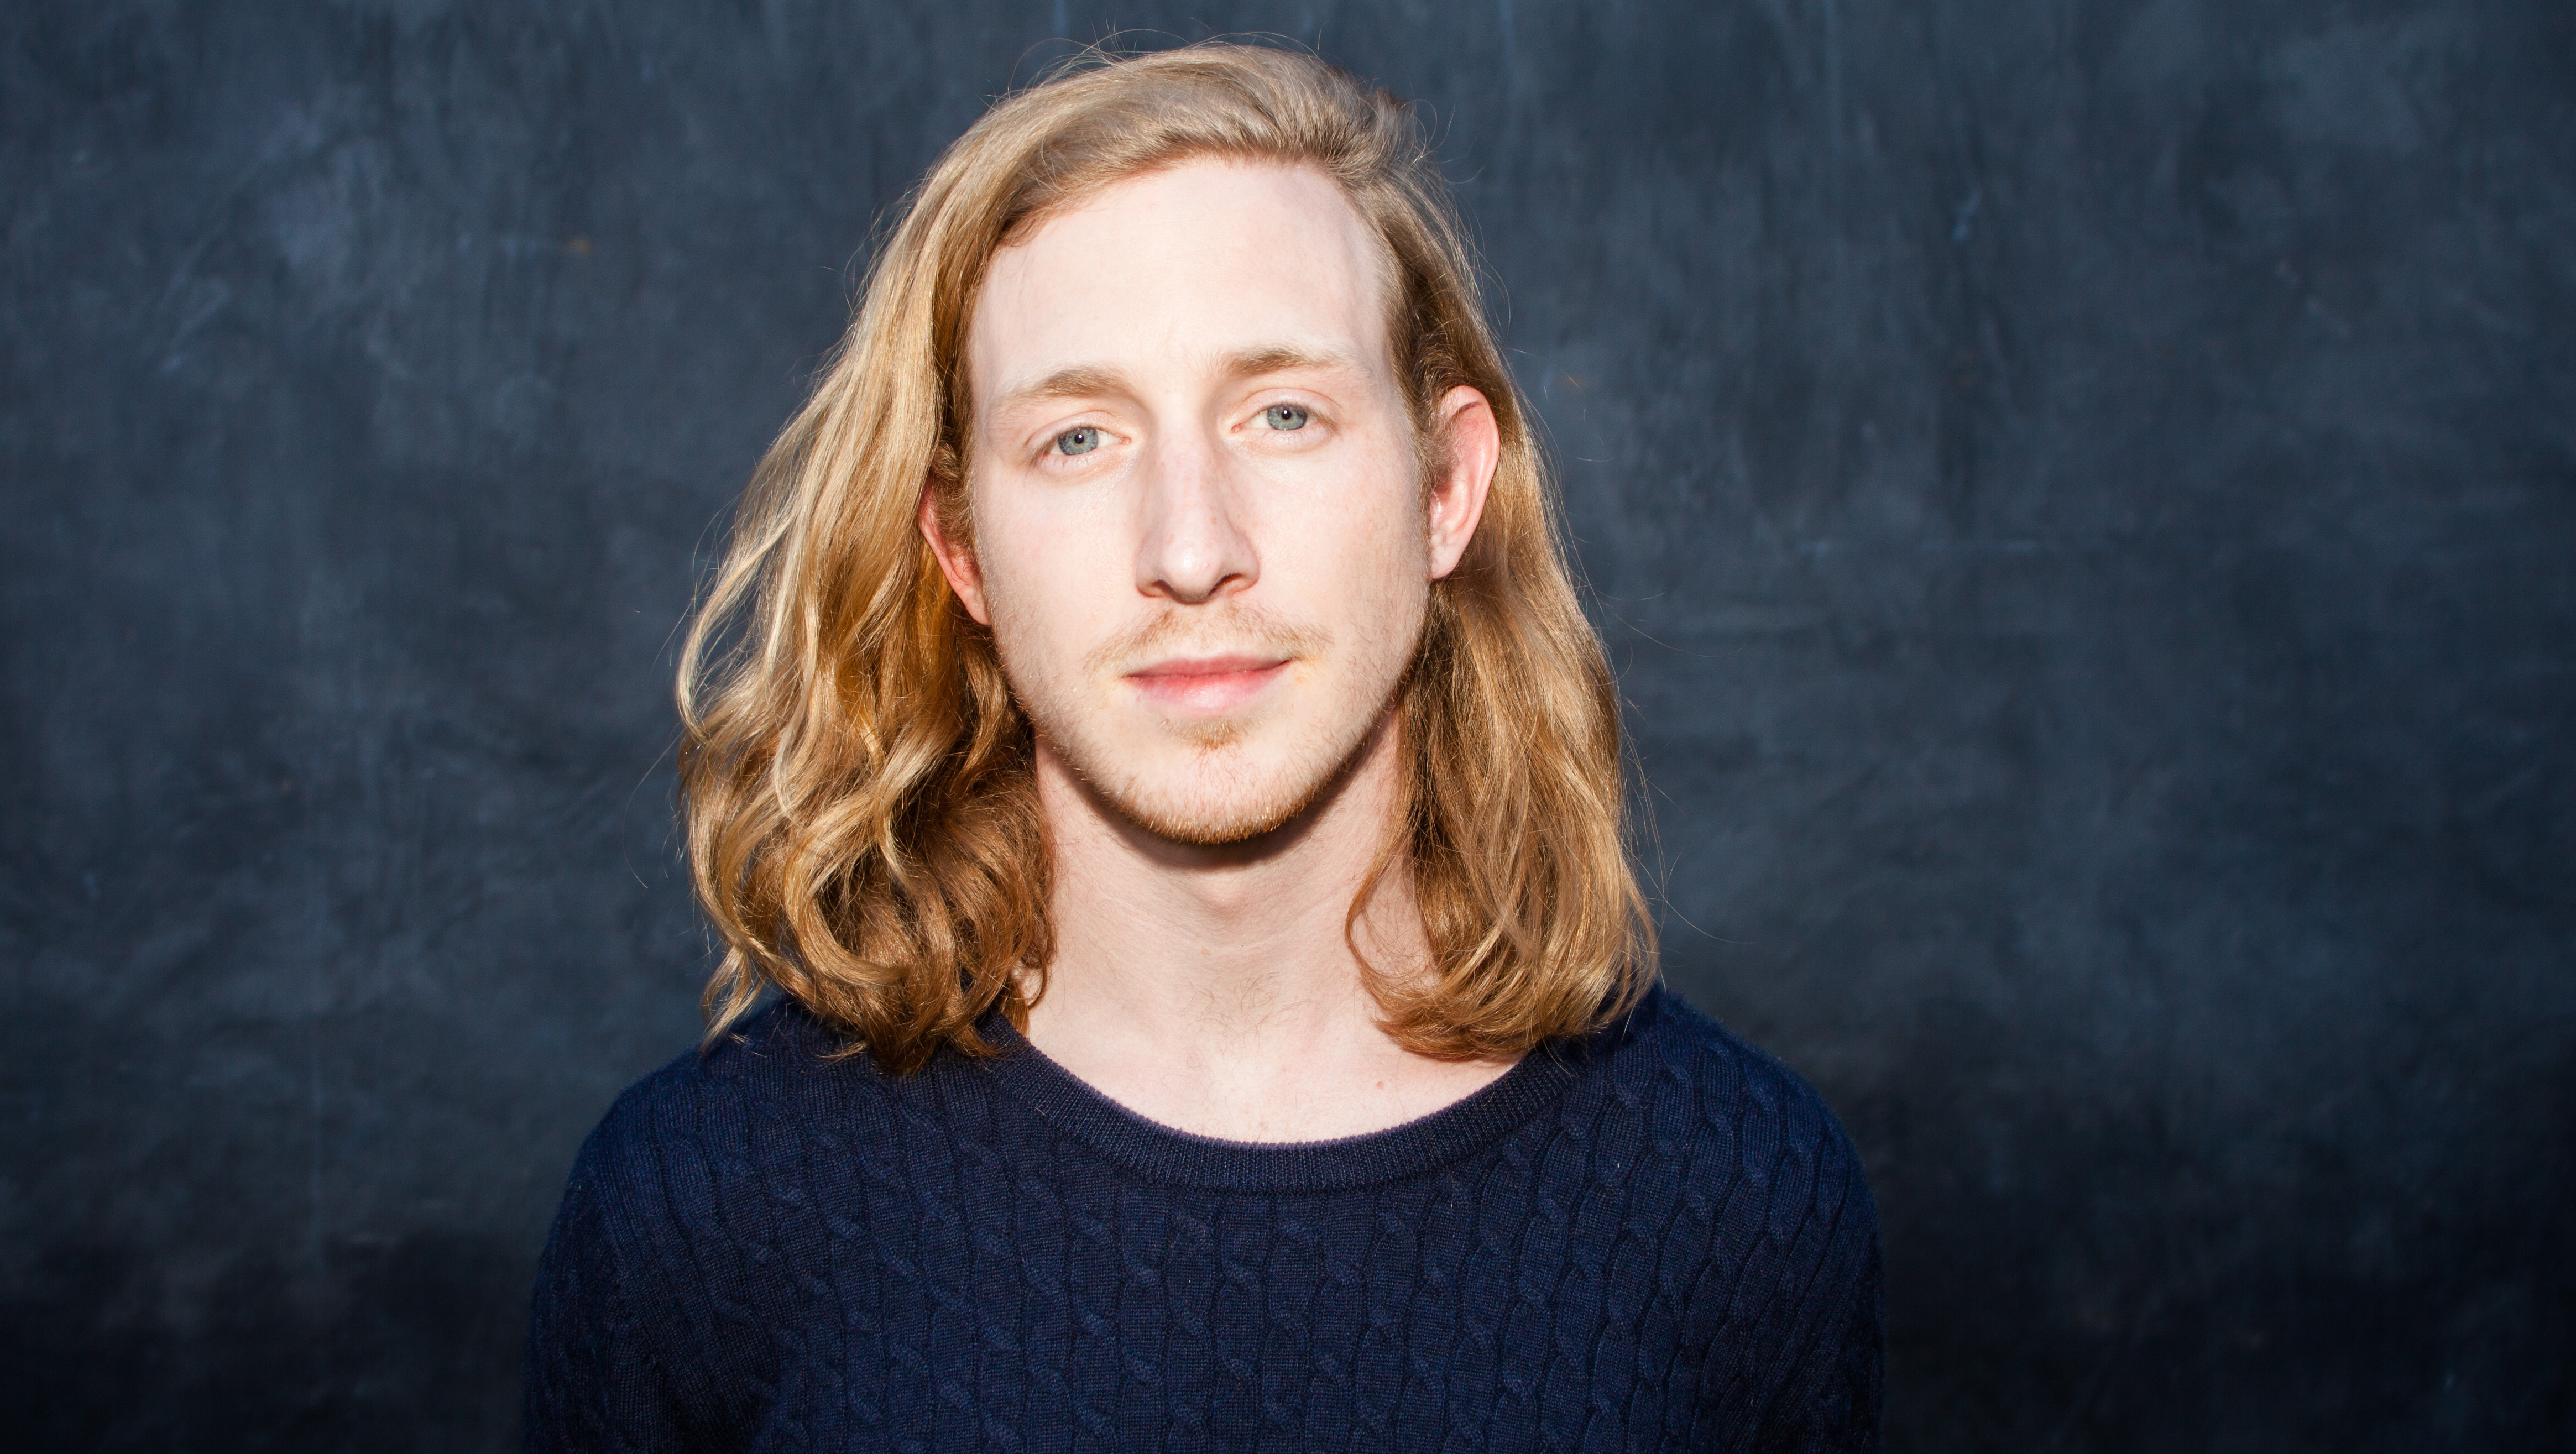 Asher roth new singles